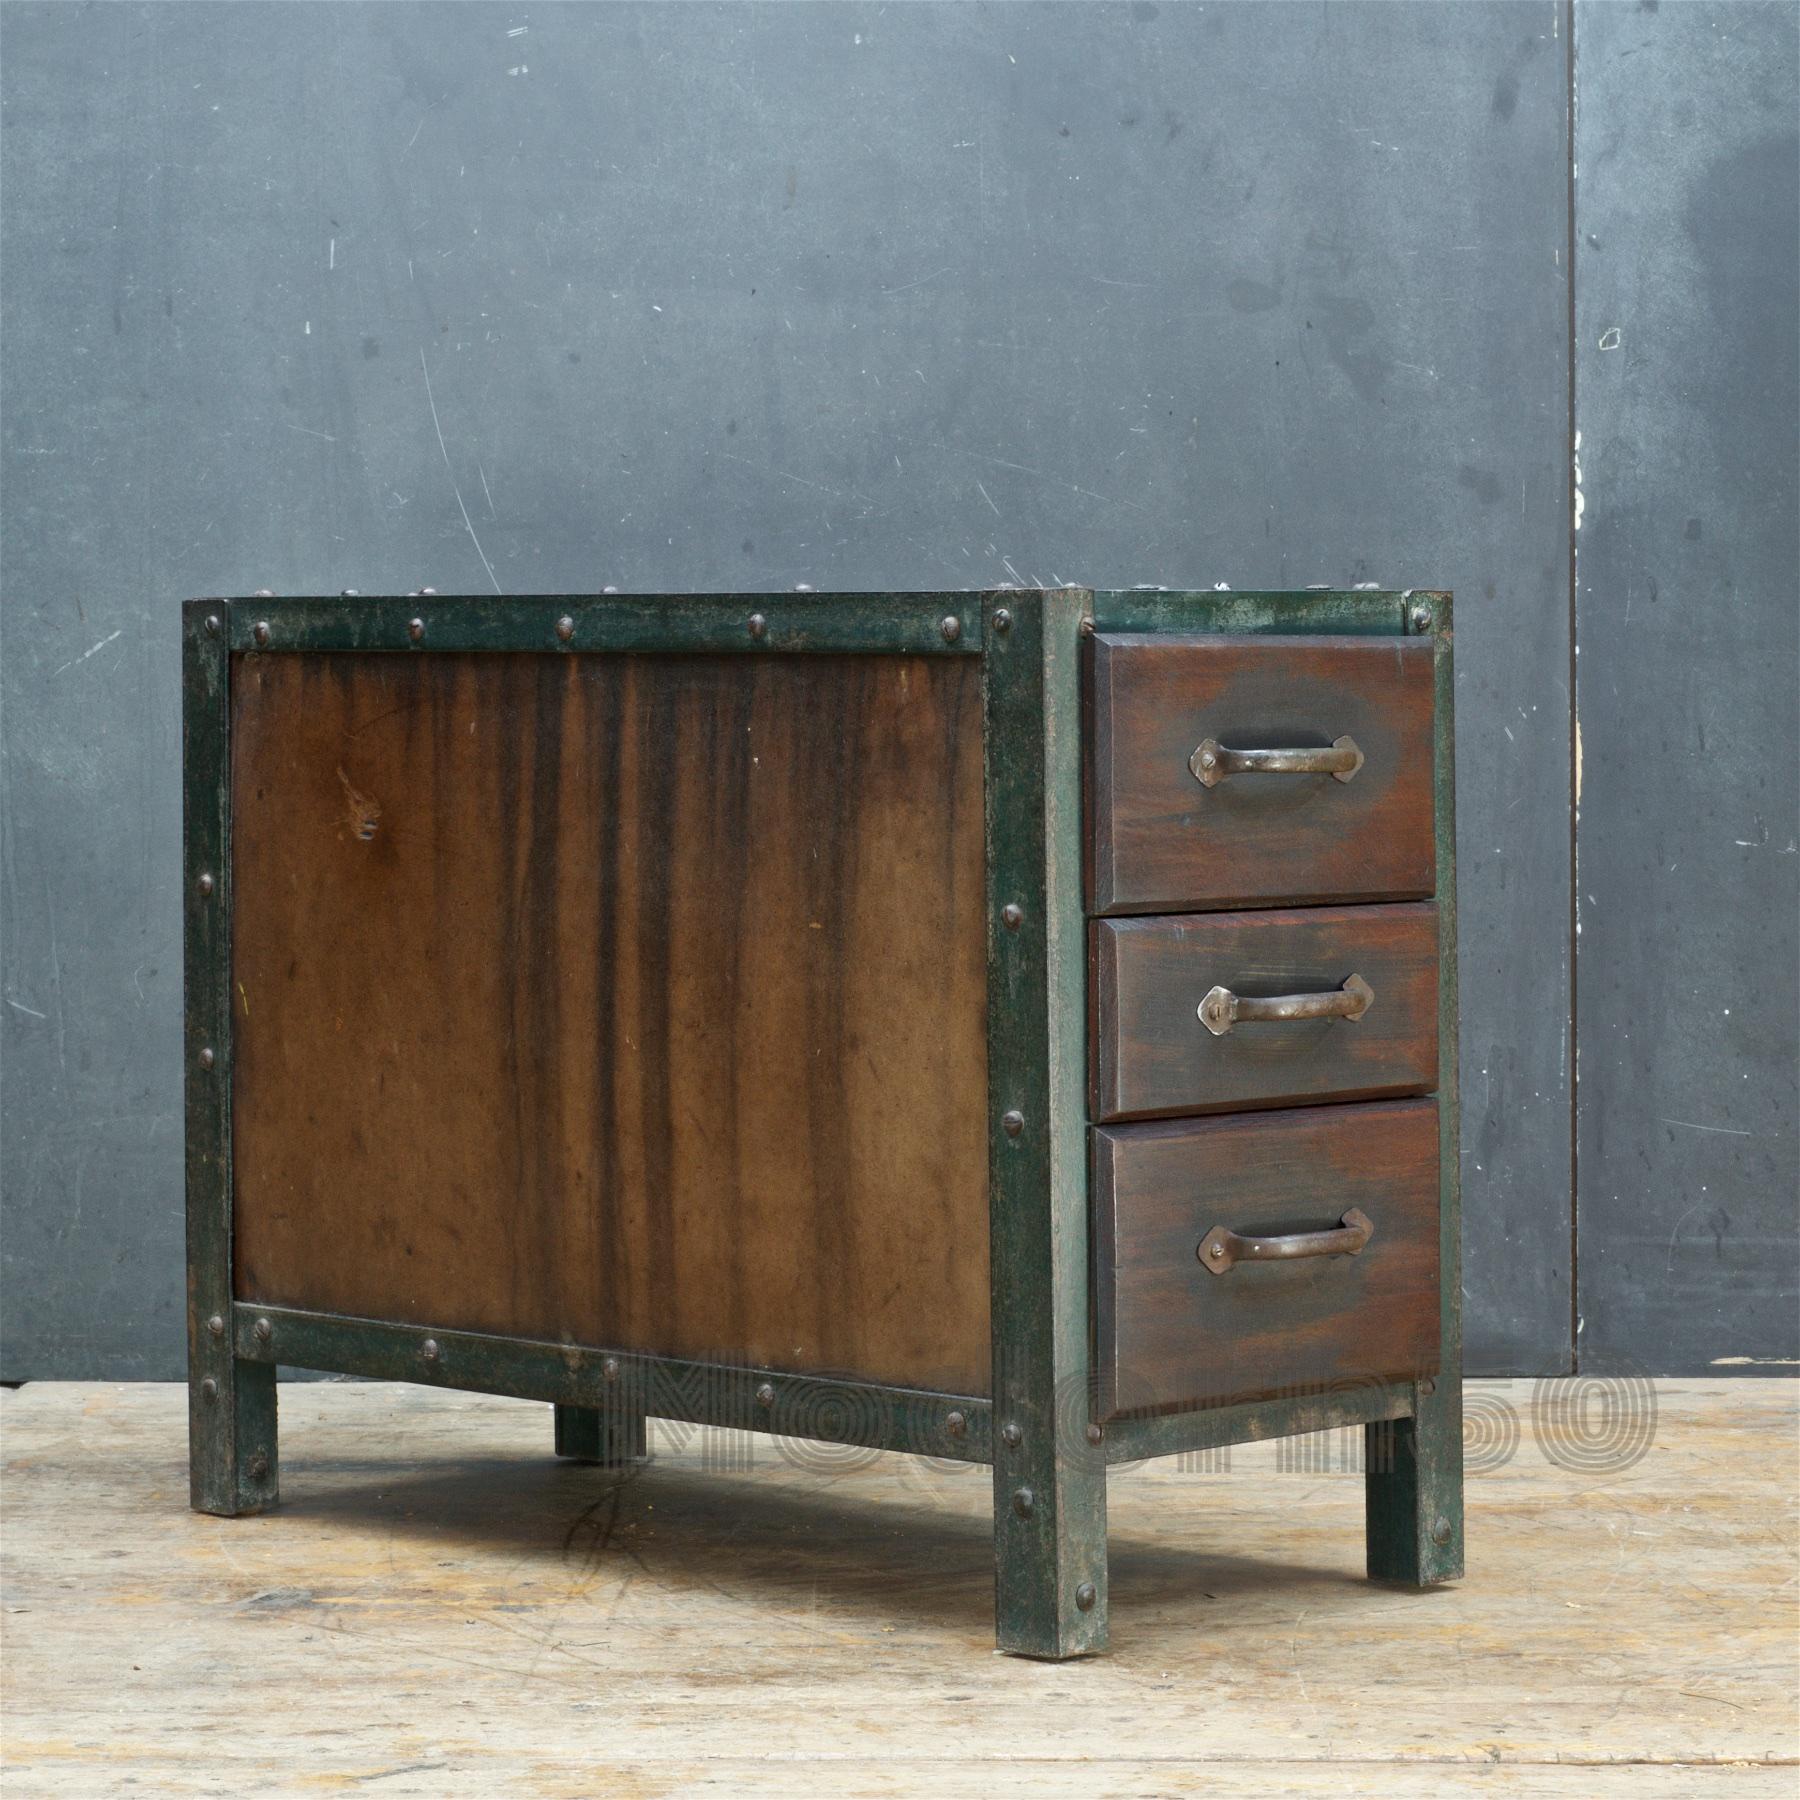 Forged 1930s Industrial Workshop Chest Cabinet Factory Vintage Nightstand Drawers Steel